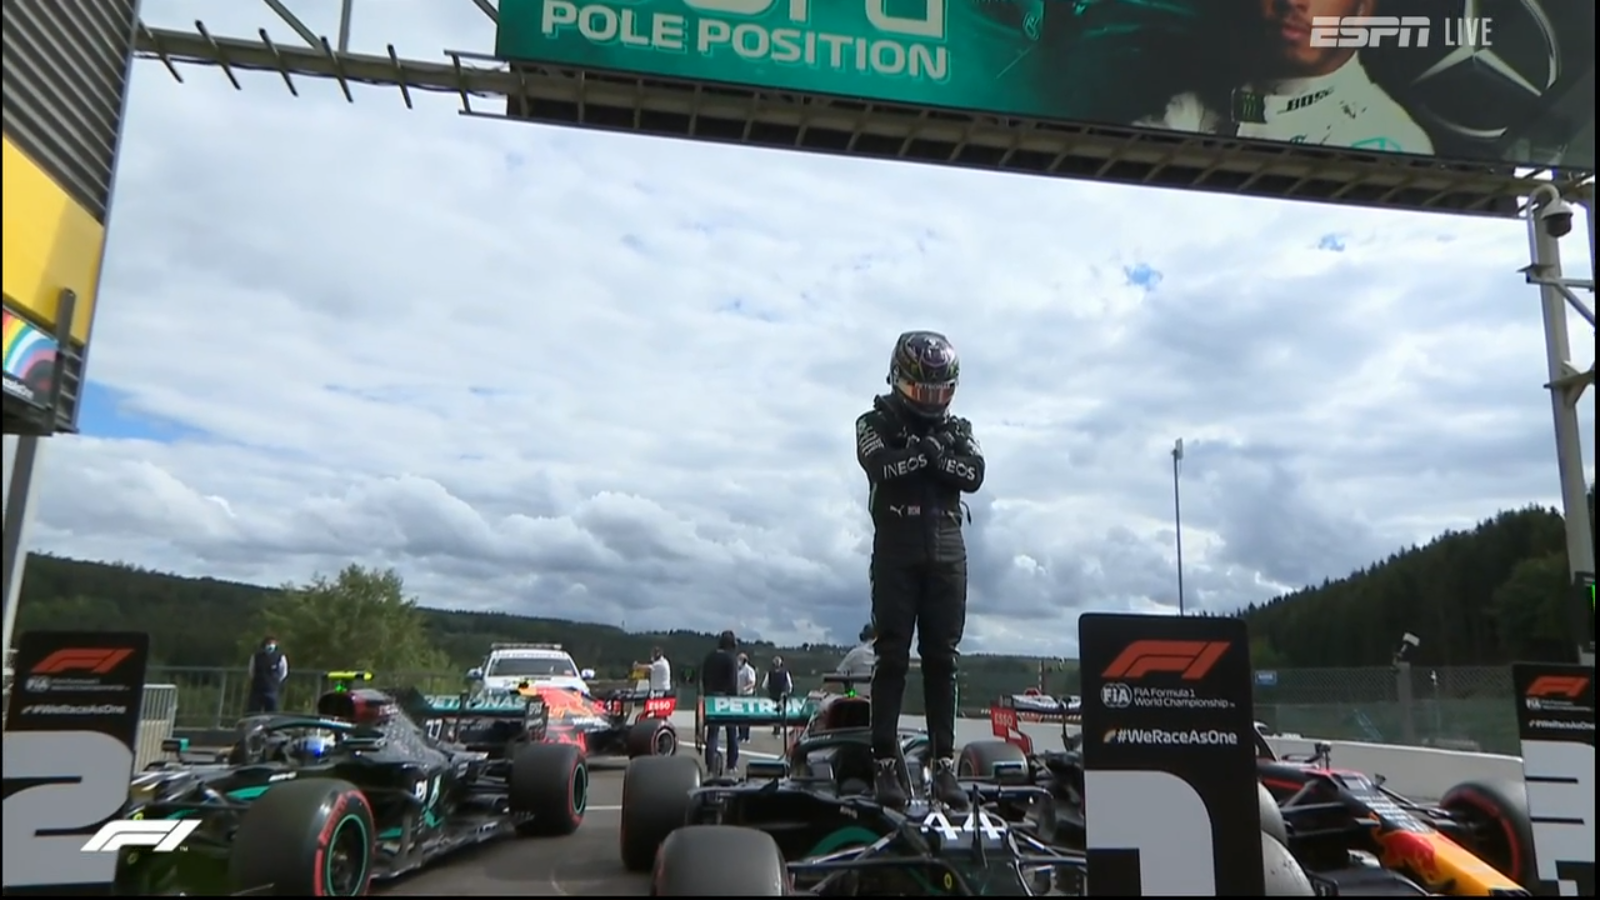 Wakanda forever!  Lewis Hamilton (Mercedes AMG) does a tribute to Chadwick Boseman, who lost his 4 year battle with colon cancer.